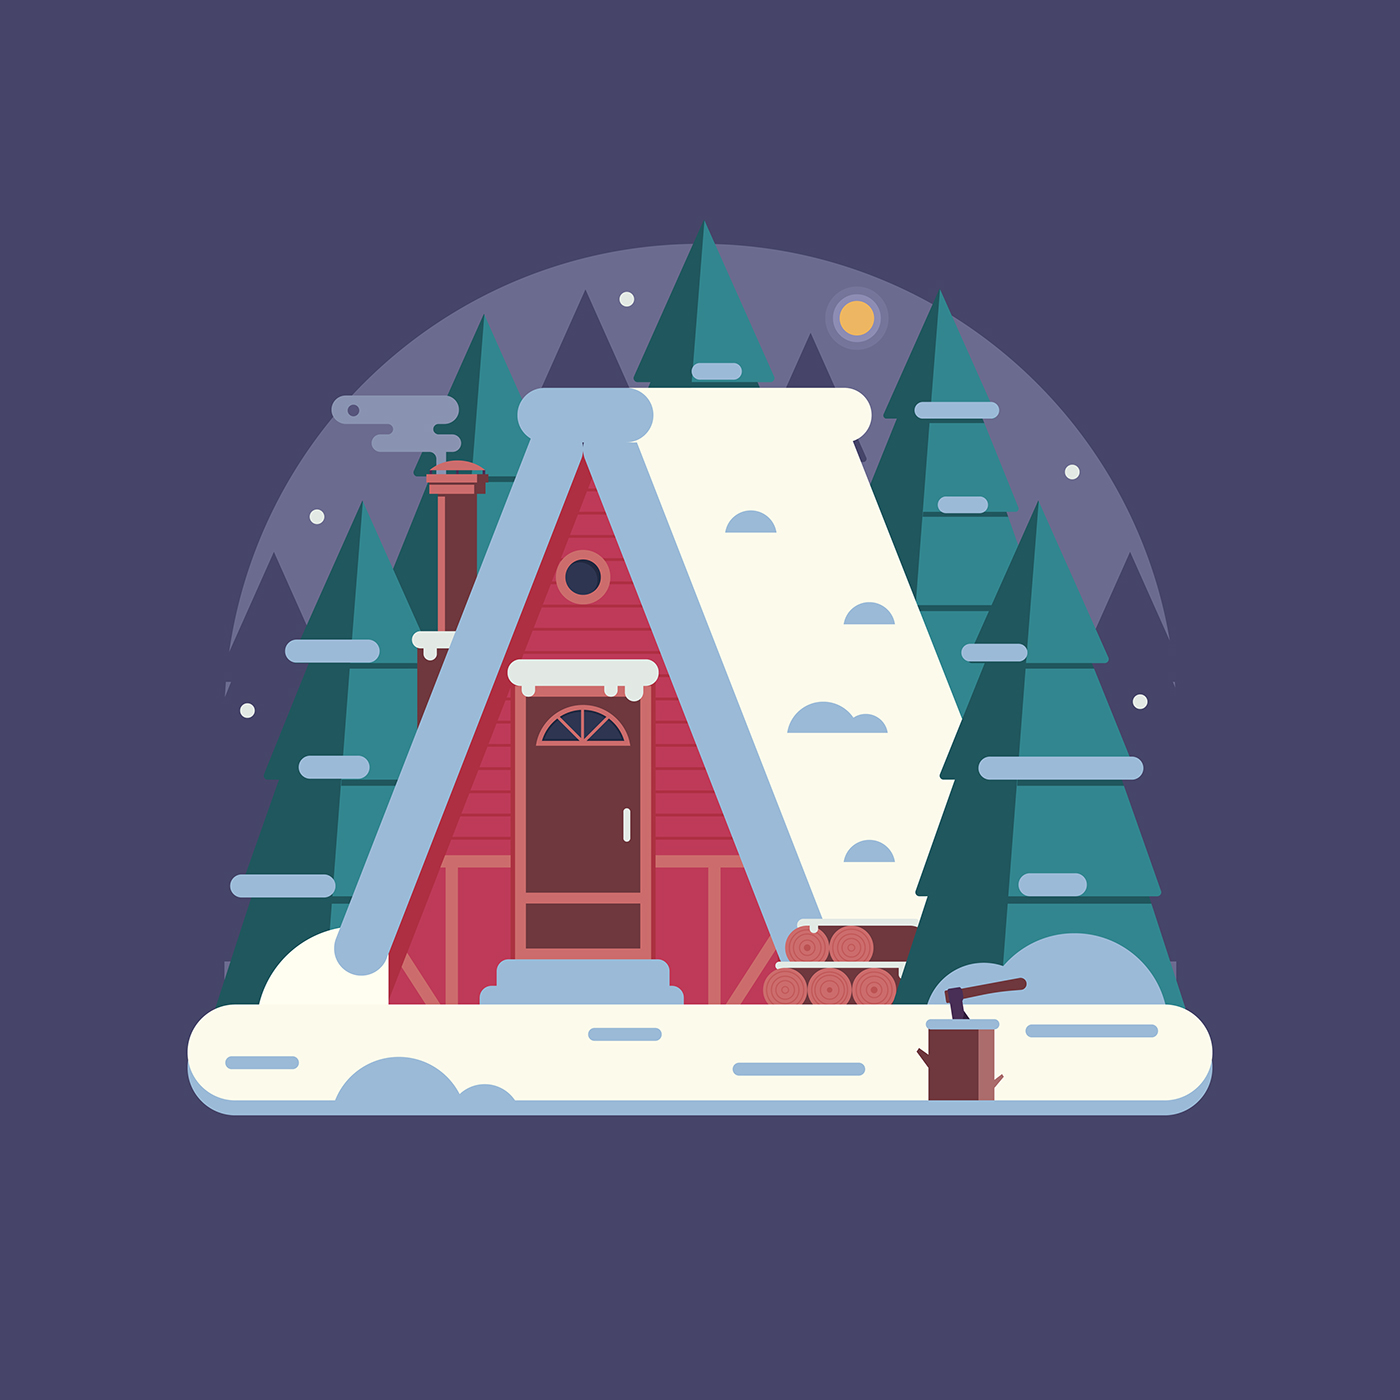 winter snow house cabin Collection flat design ILLUSTRATION  vector Cottage home